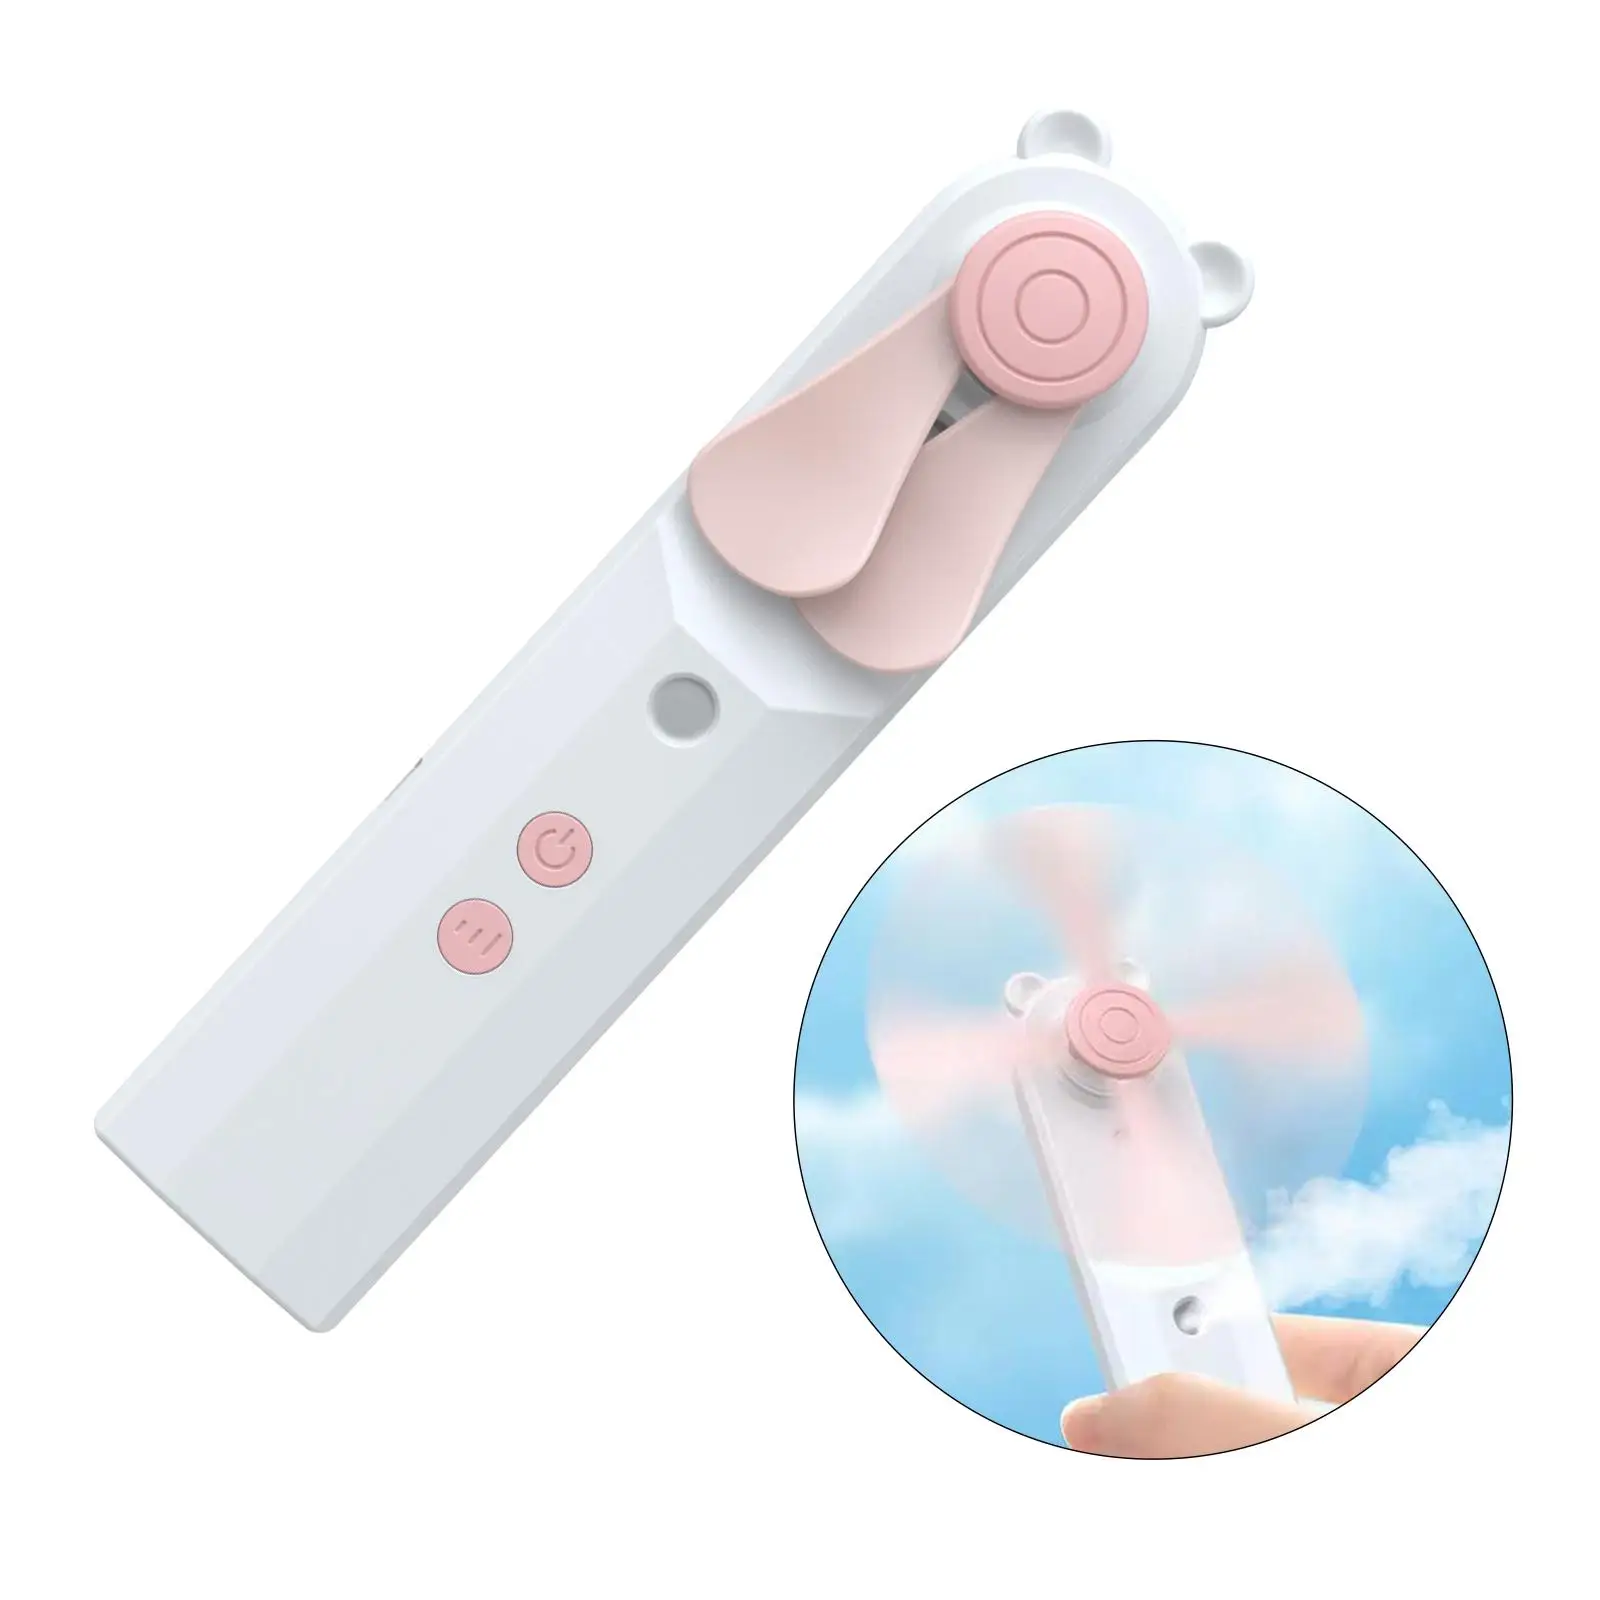 USB Handheld Misting Fan Mister 2 in 1 Rechargeable Silent Portable 3 Speed Air Cooing Fan for Personal Travel Hiking Indoor Gym